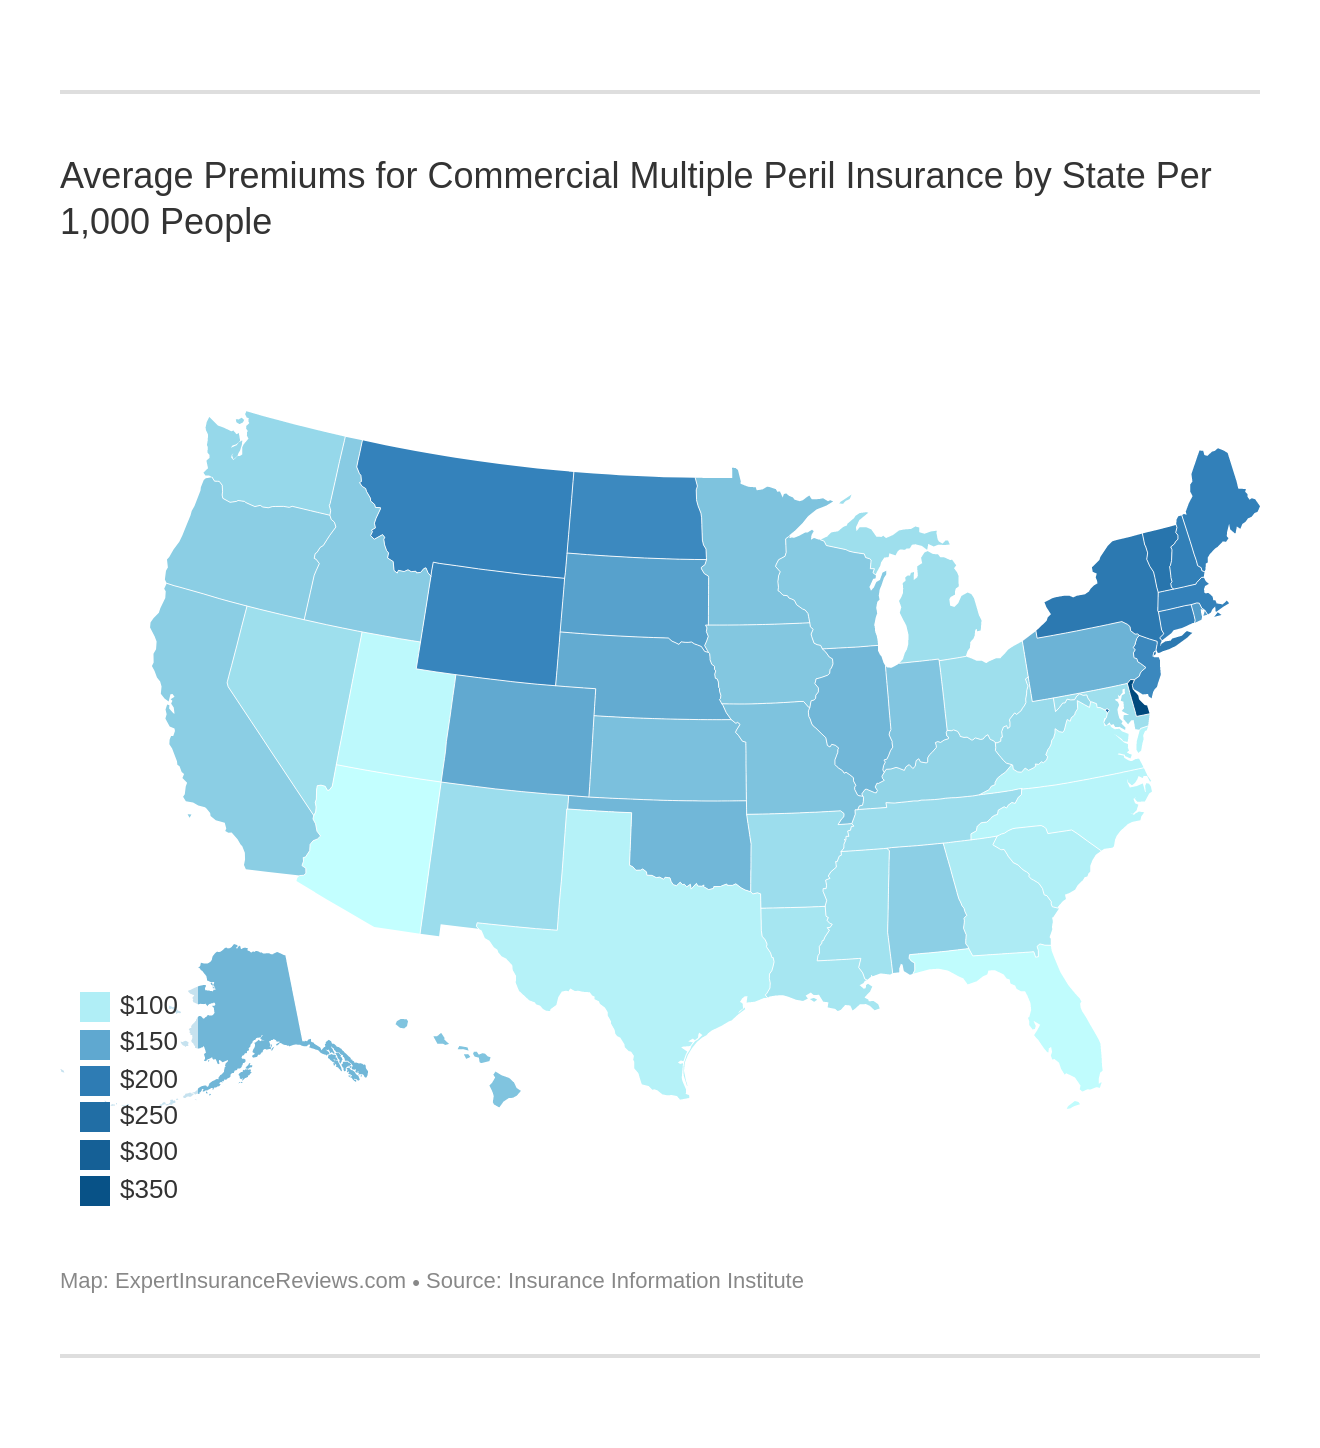 Average Premiums for Commercial Multiple Peril Insurance by State Per 1,000 People